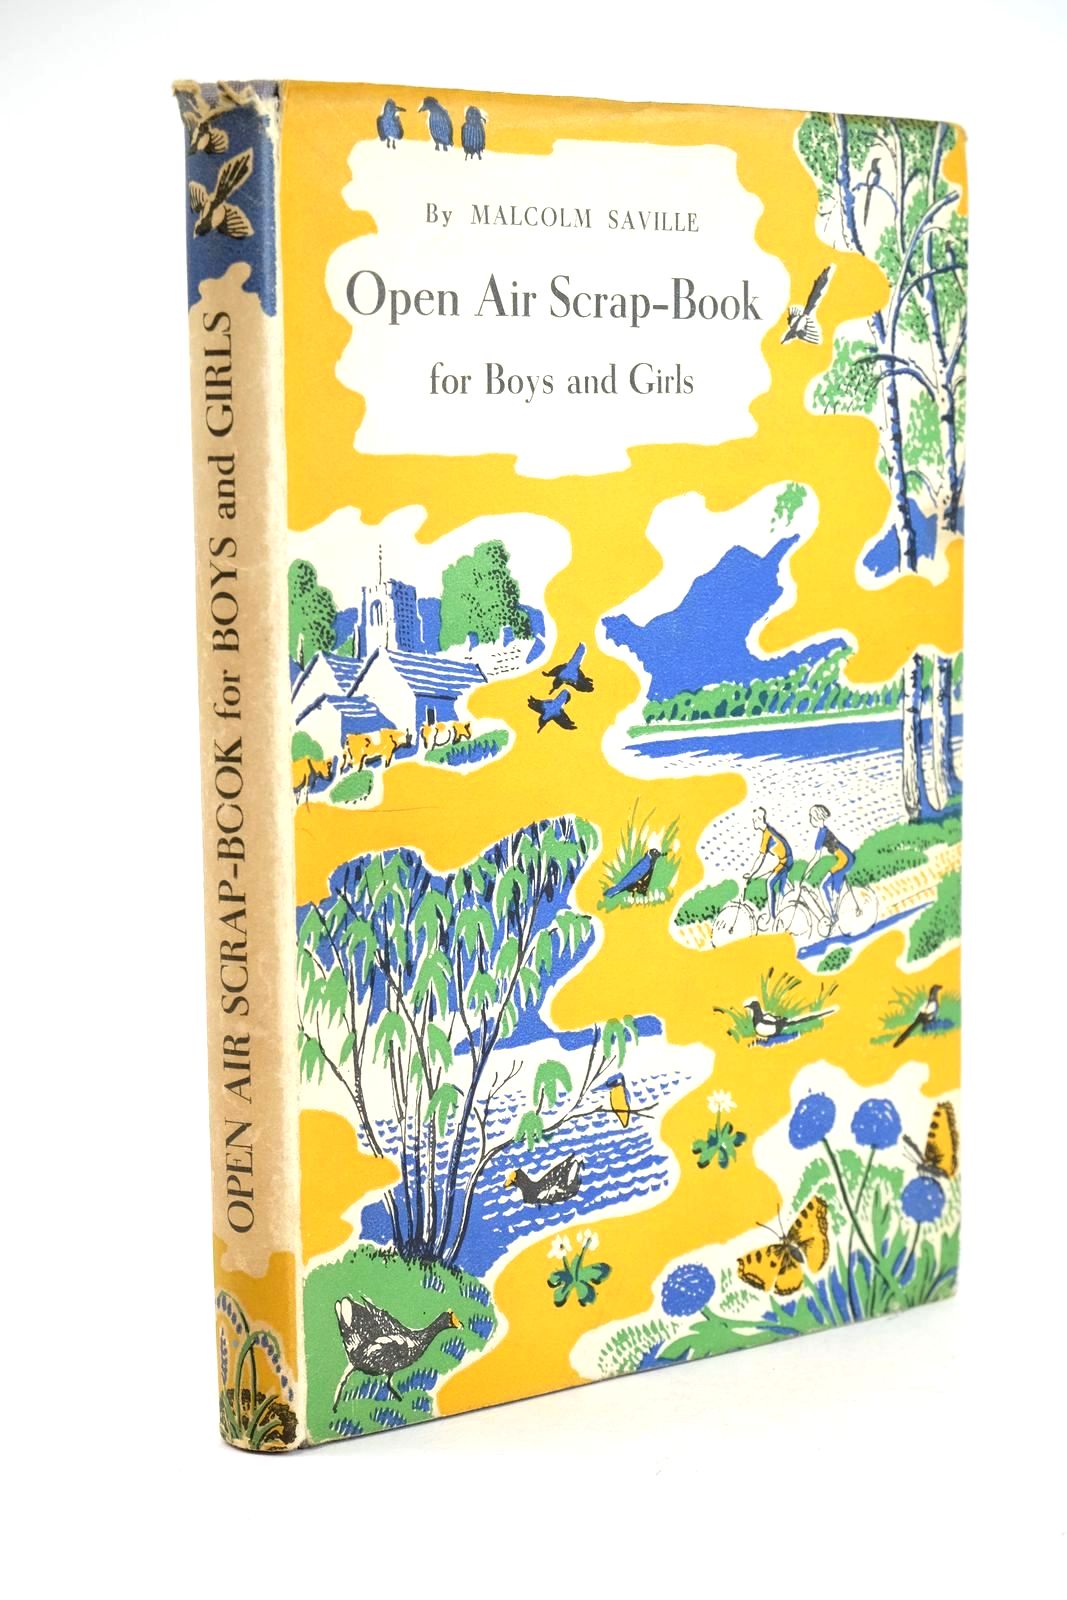 Photo of OPEN AIR SCRAP-BOOK FOR BOYS AND GIRLS written by Saville, Malcolm published by Gramol Publications Ltd. (STOCK CODE: 1324613)  for sale by Stella & Rose's Books